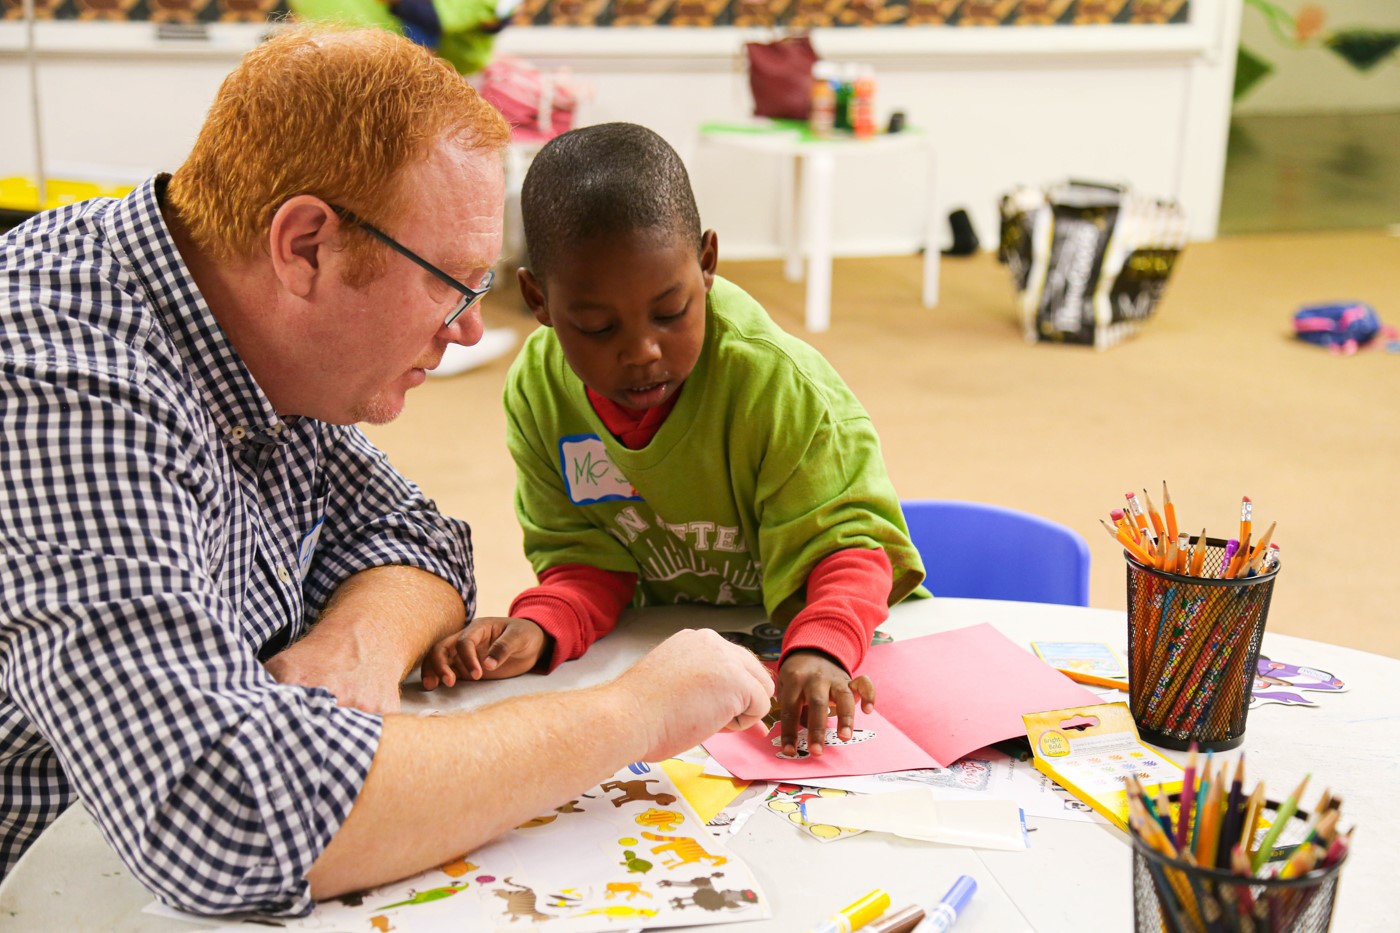 The program links children to adults that will read and do creative activities with children.